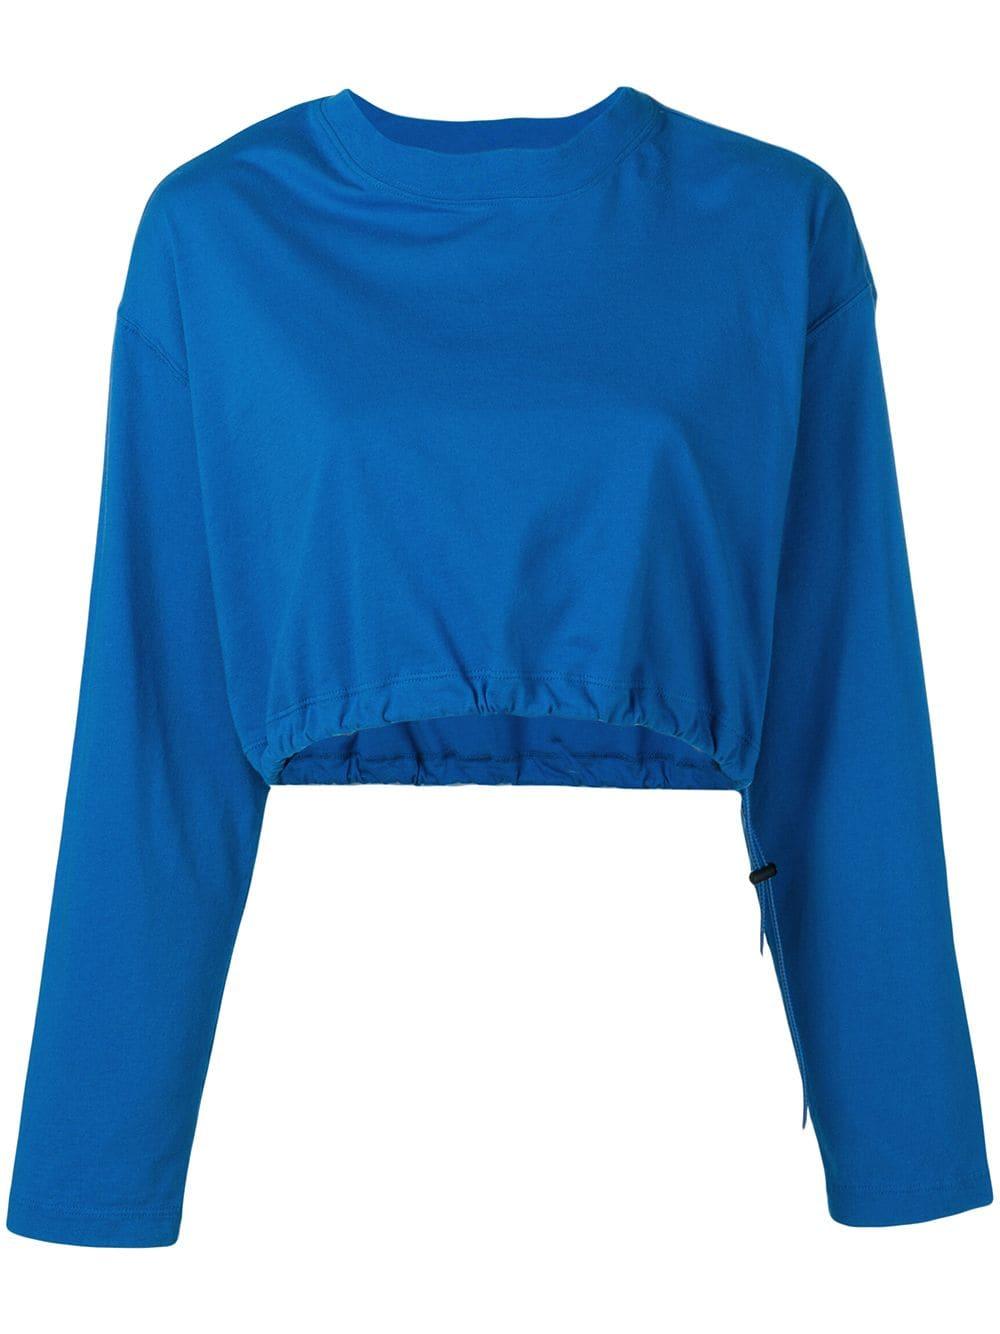 Unravel Project Cotton Cropped Sweatshirt in Blue - Lyst